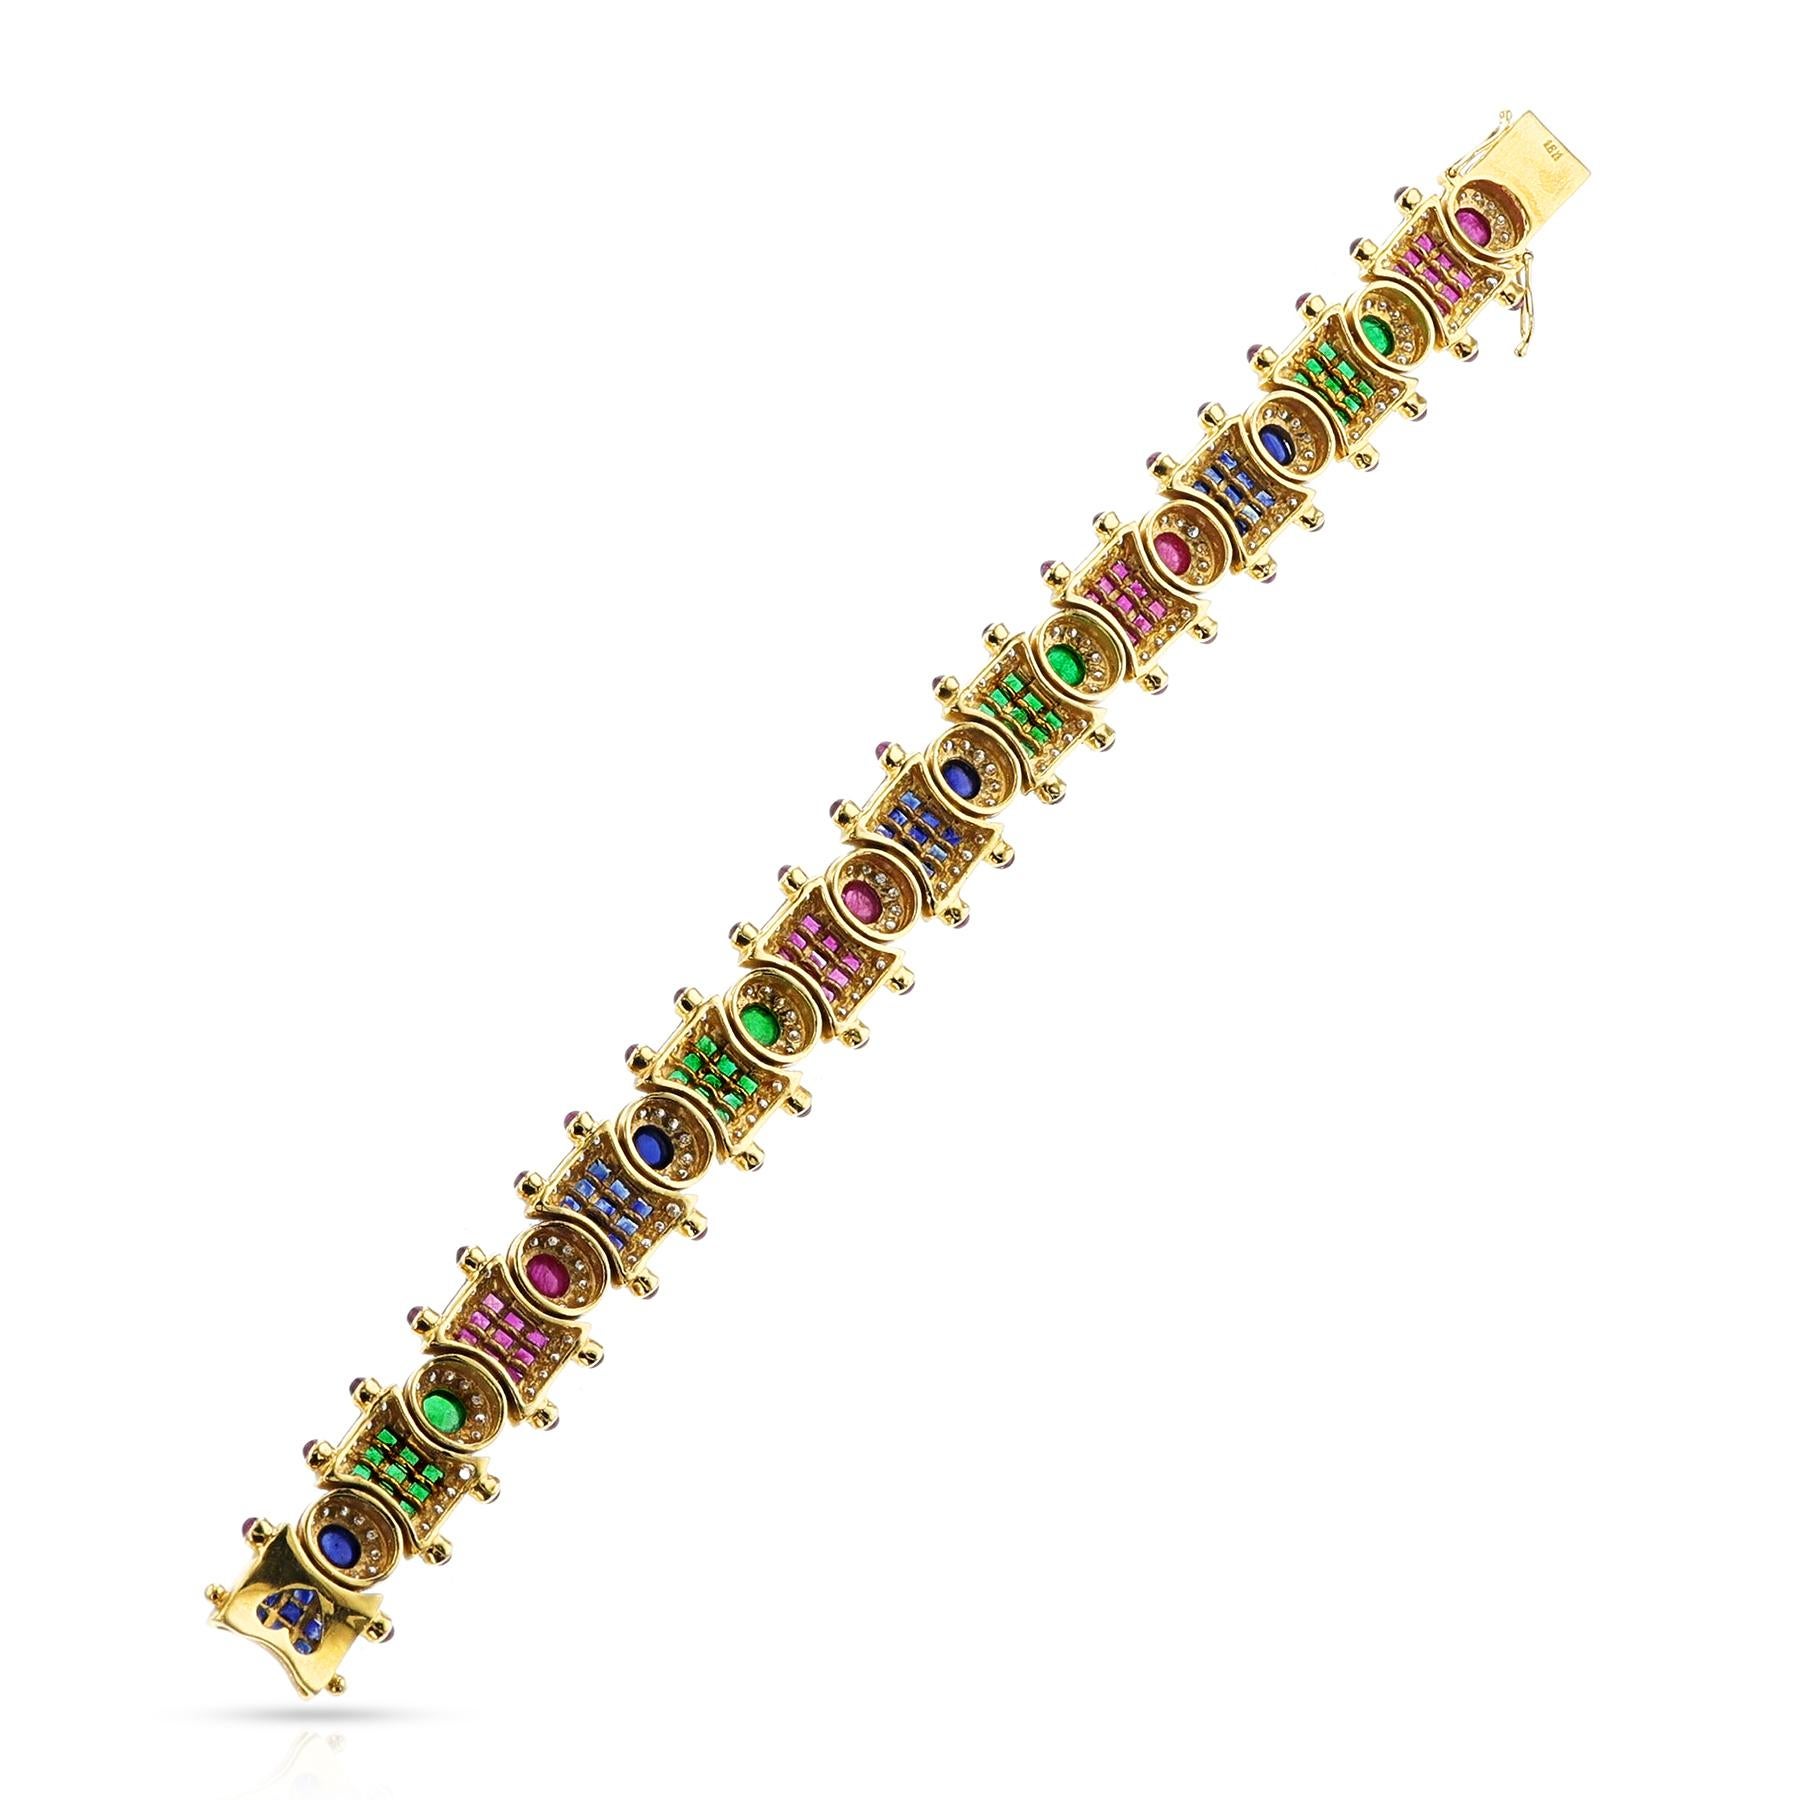 Ruby, Emerald, Sapphire, Diamond, Mixed Cut and Cabochon Bracelet, 18k For Sale 1